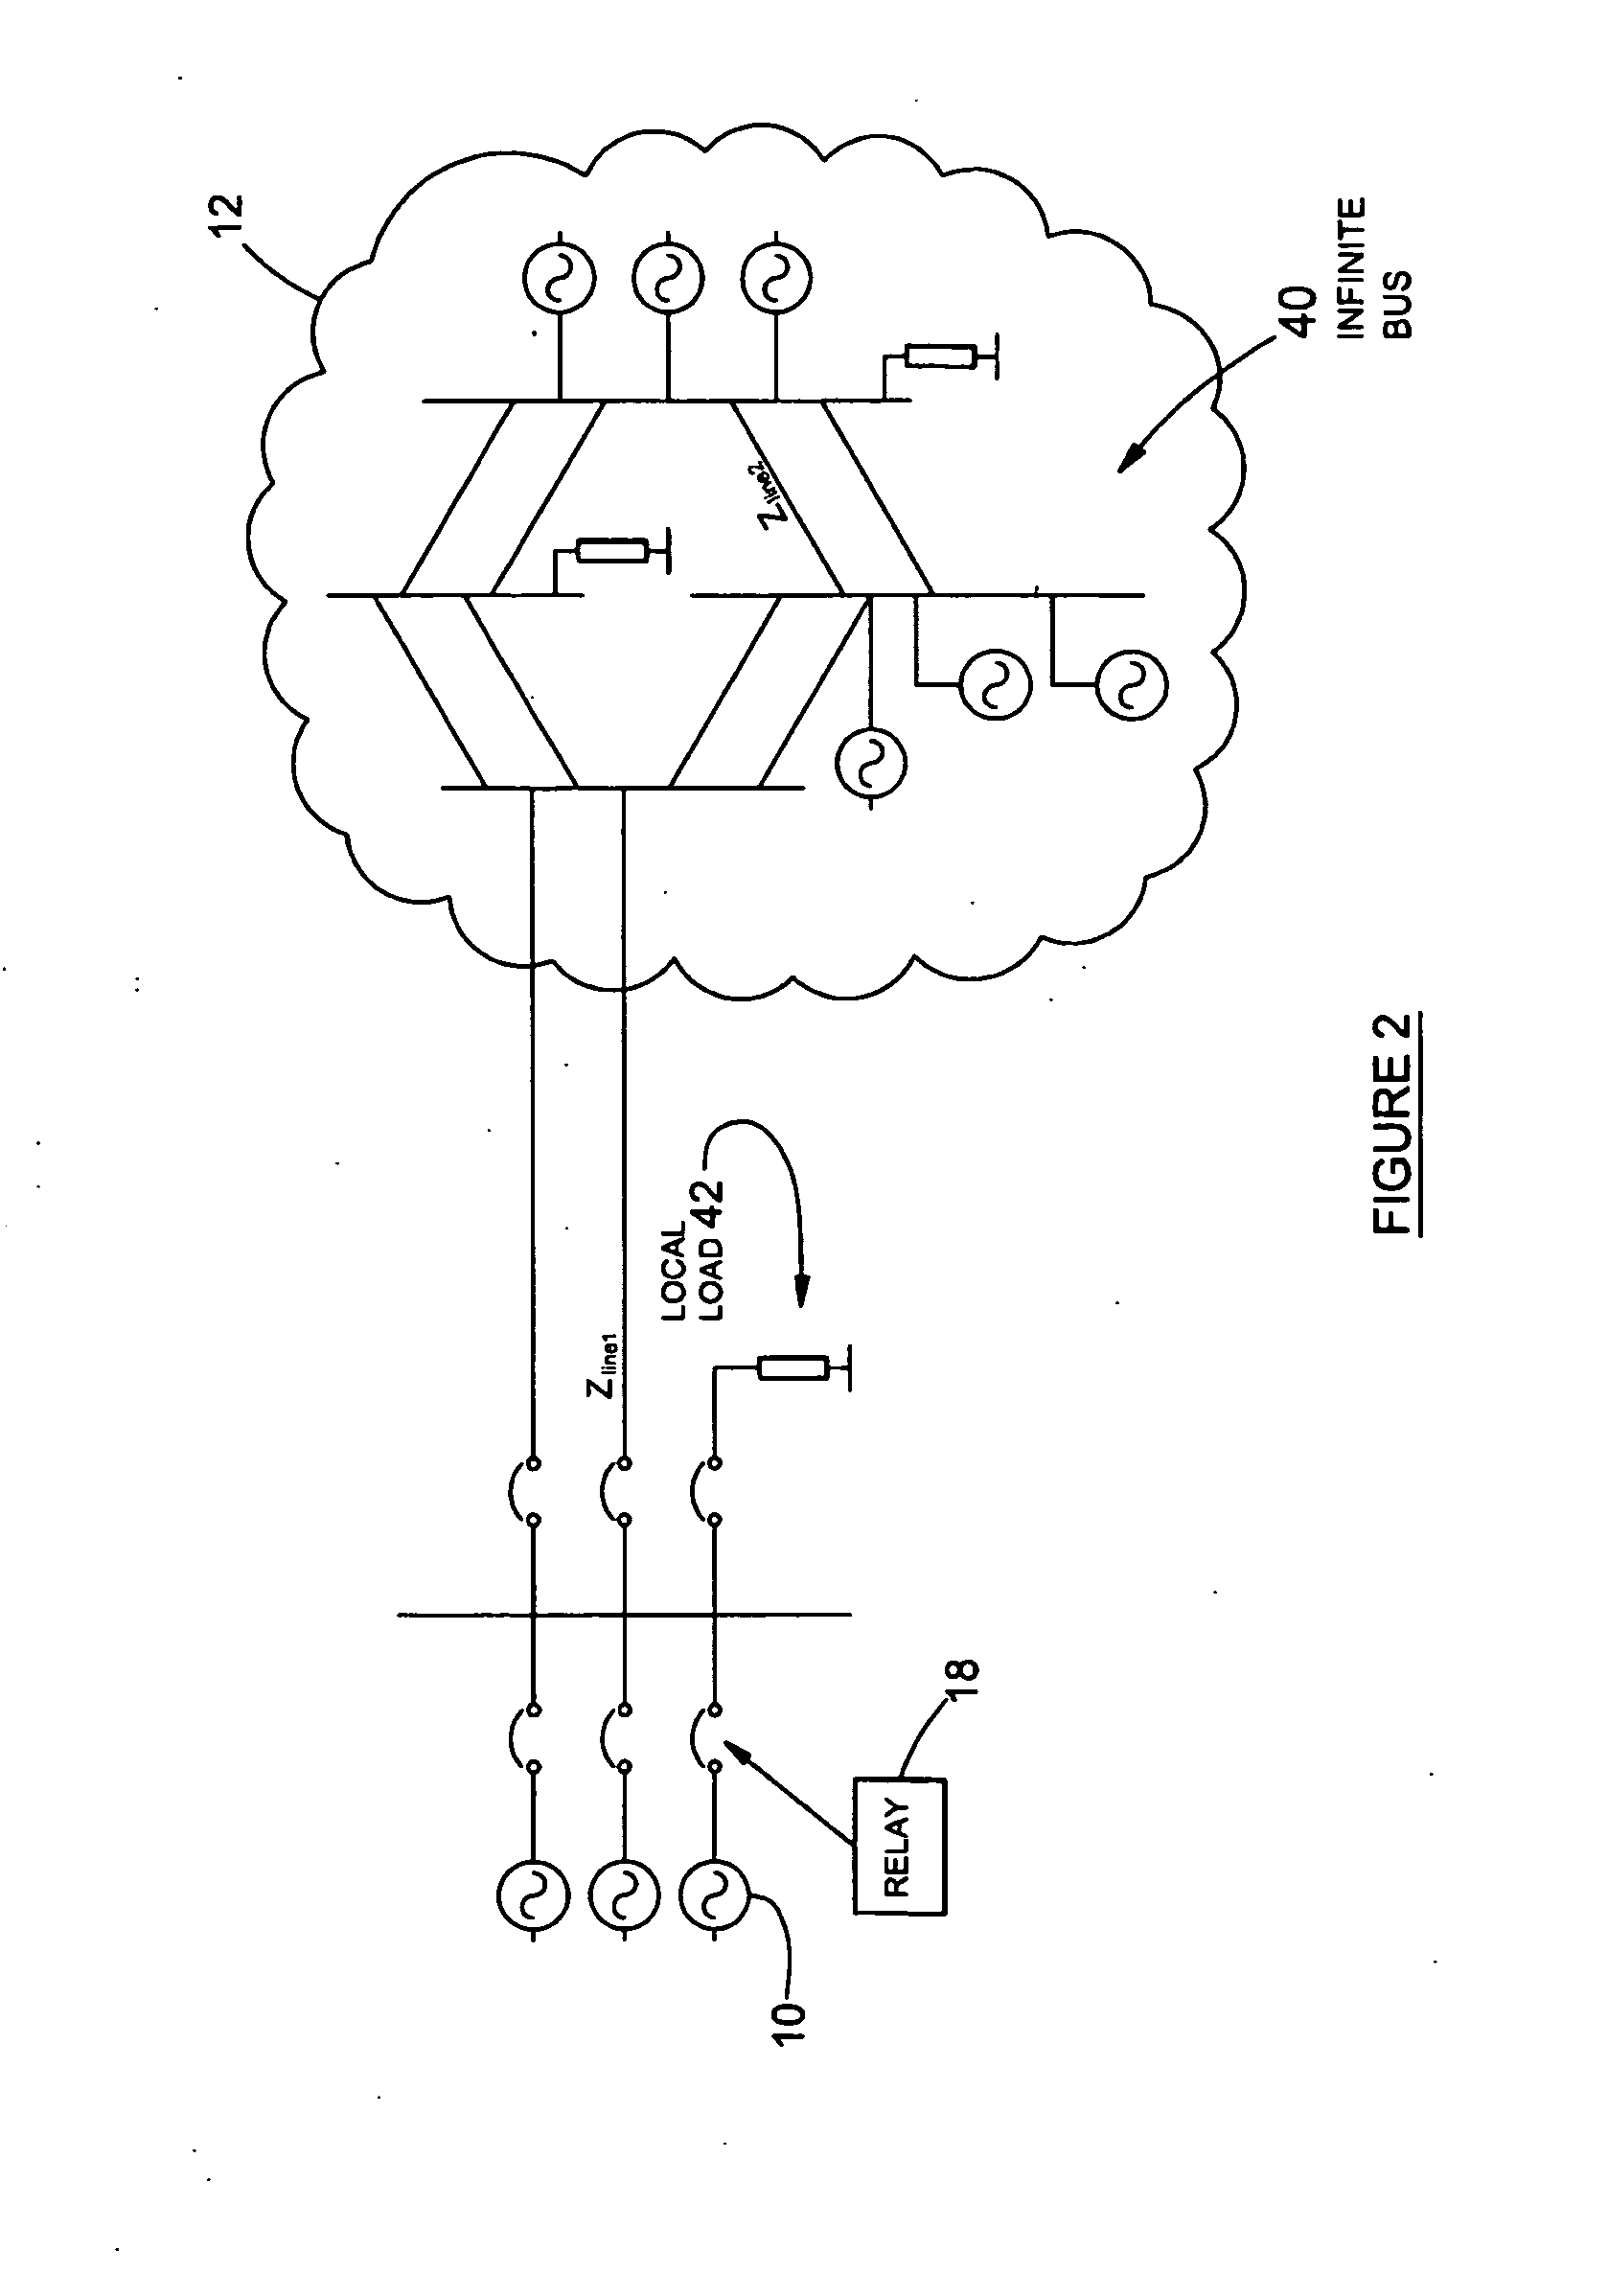 Pole-slip protection system and method for synchronous machines